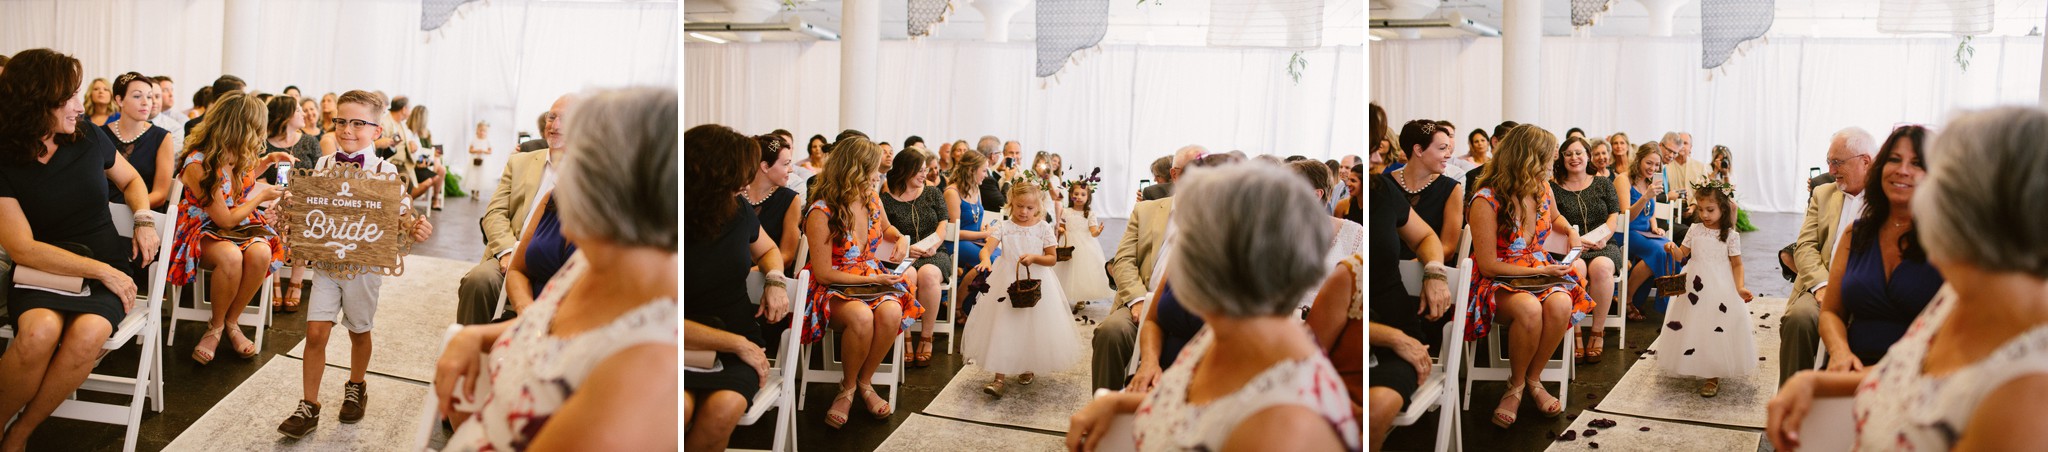 downtown-cleveland-red-space-events-wedding-photos-32